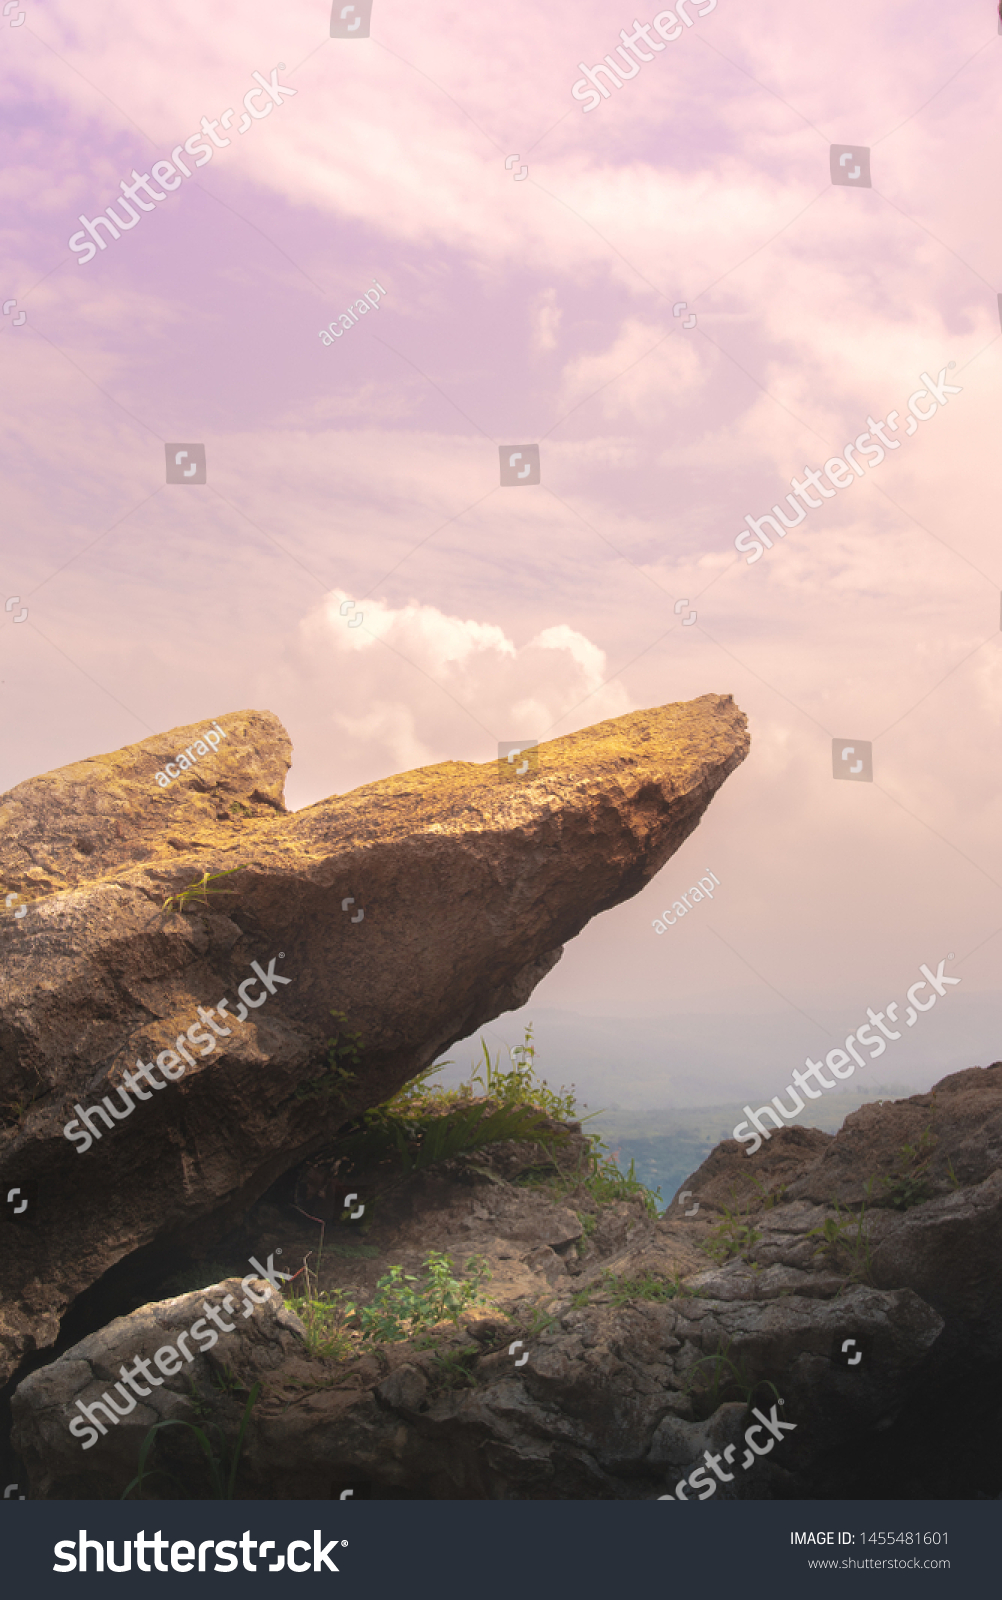 Point Edge of Cliff King Rock on Stone Garden at The Very Top of Mountain During Pink Sunrise or Sunset #1455481601